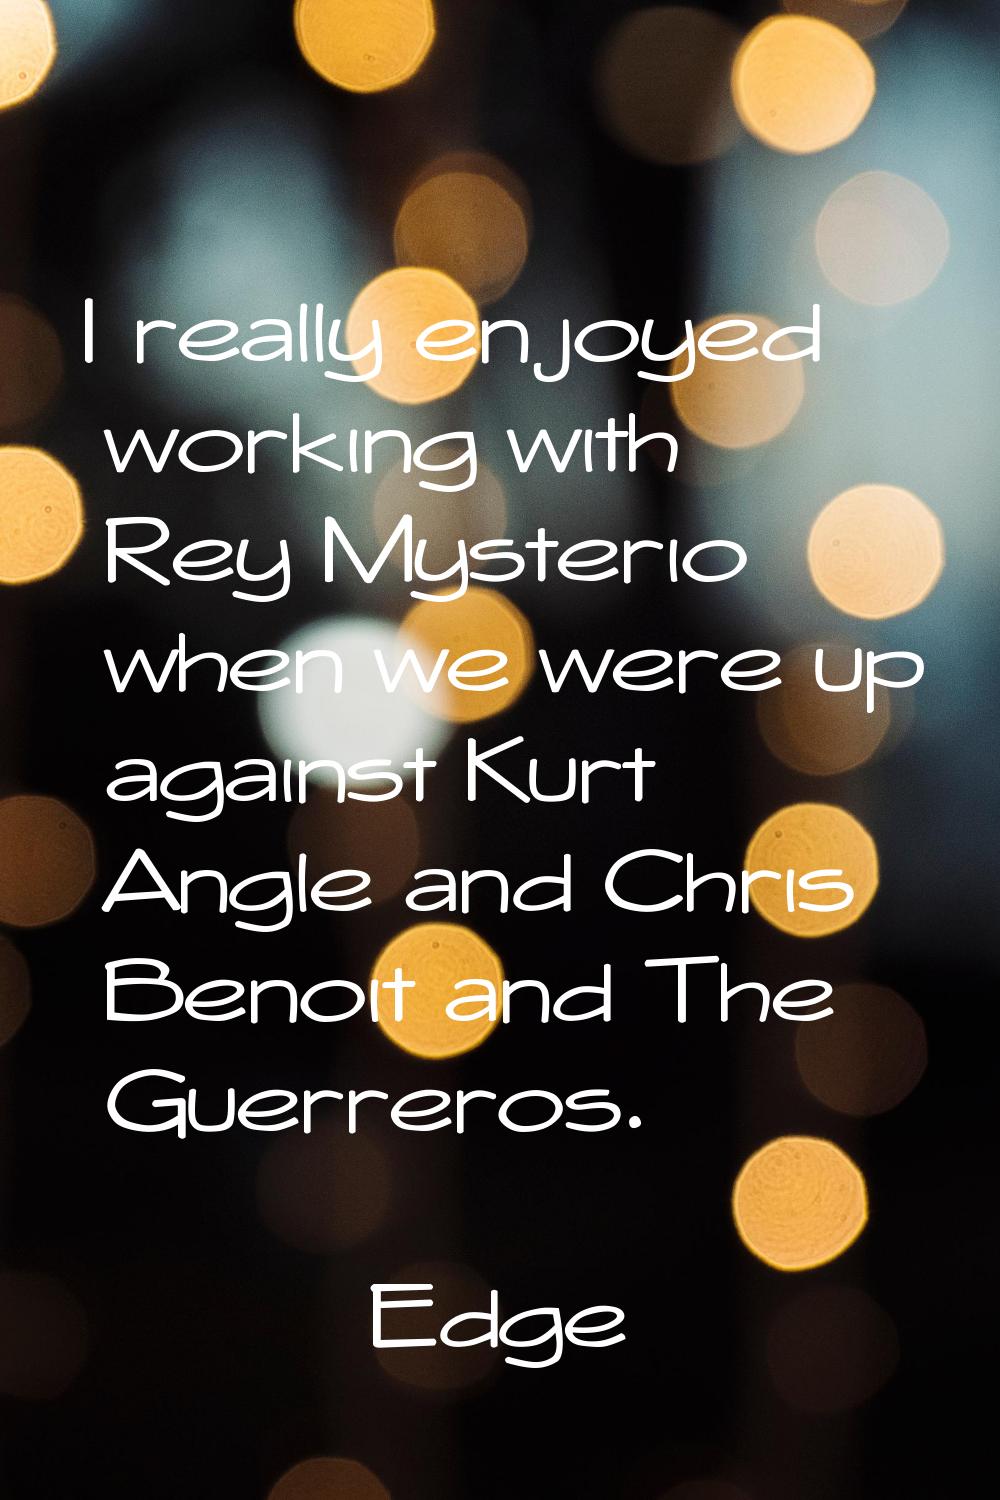 I really enjoyed working with Rey Mysterio when we were up against Kurt Angle and Chris Benoit and 